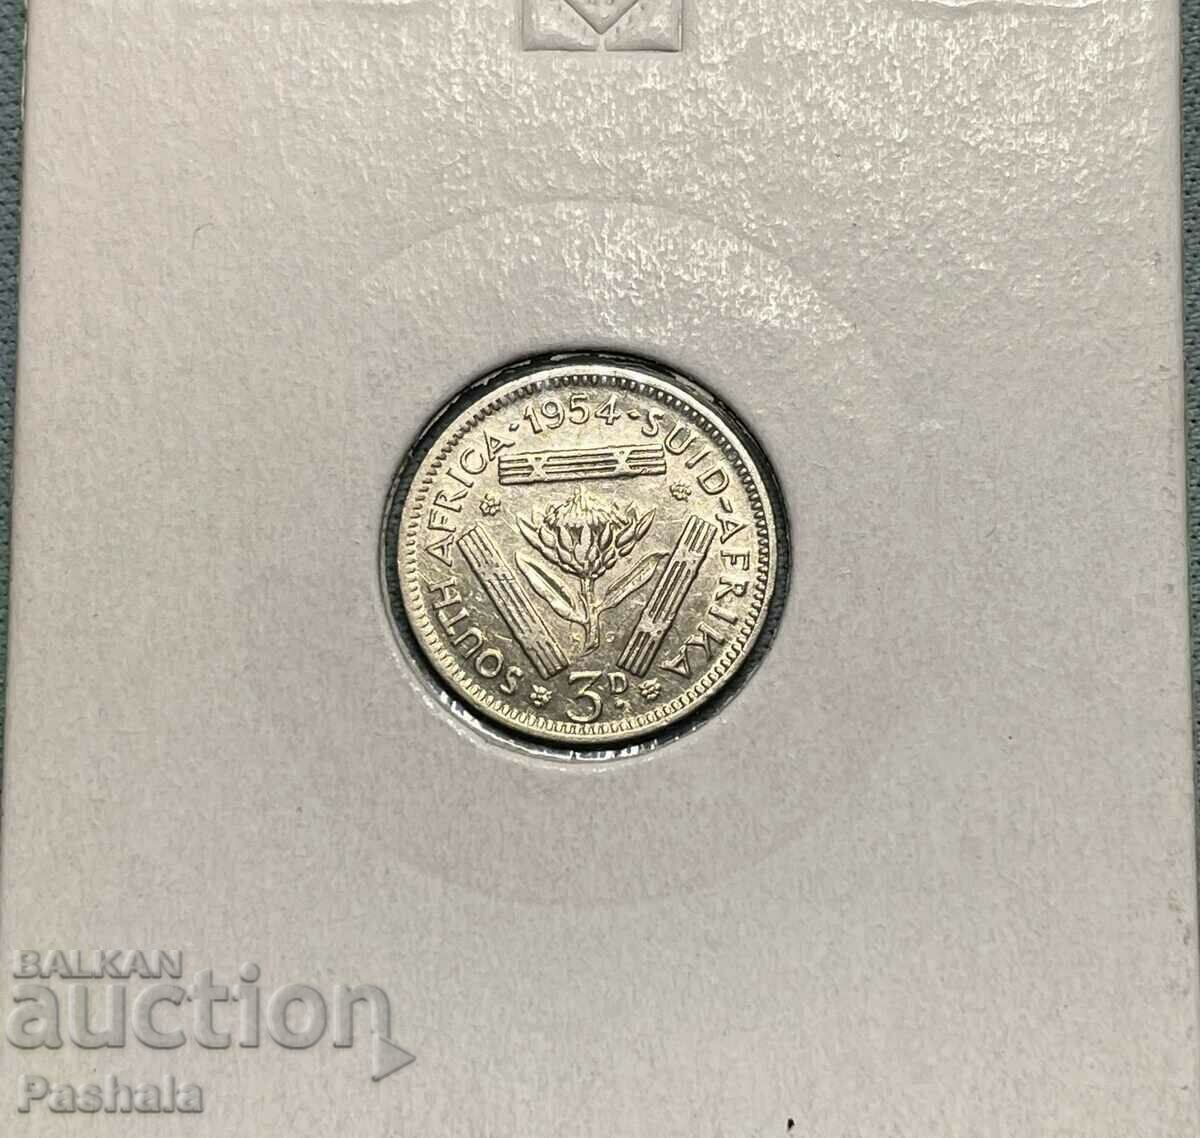 South Africa 3 pence 1954